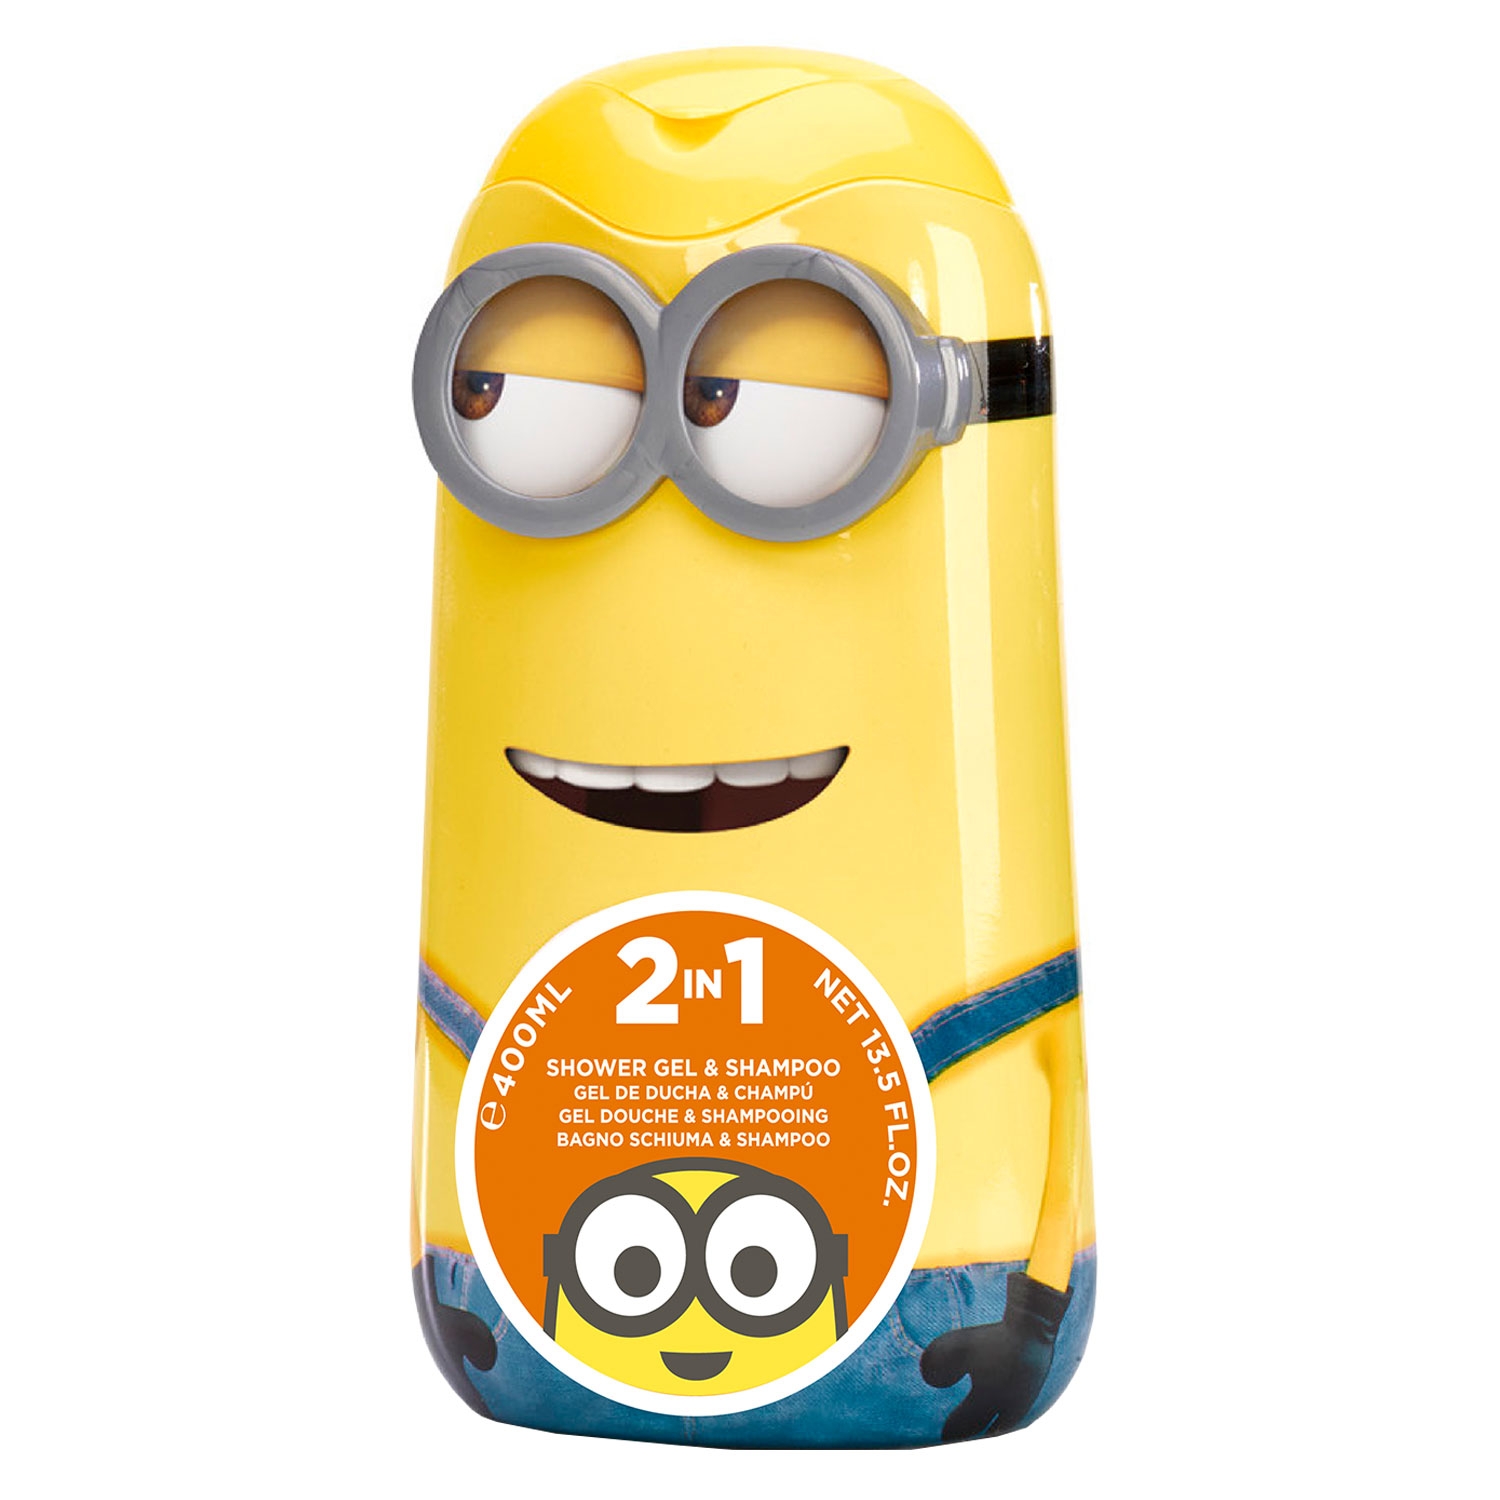 Product image from Kids Shower Gels - Minions Shower Gel & Shampoo